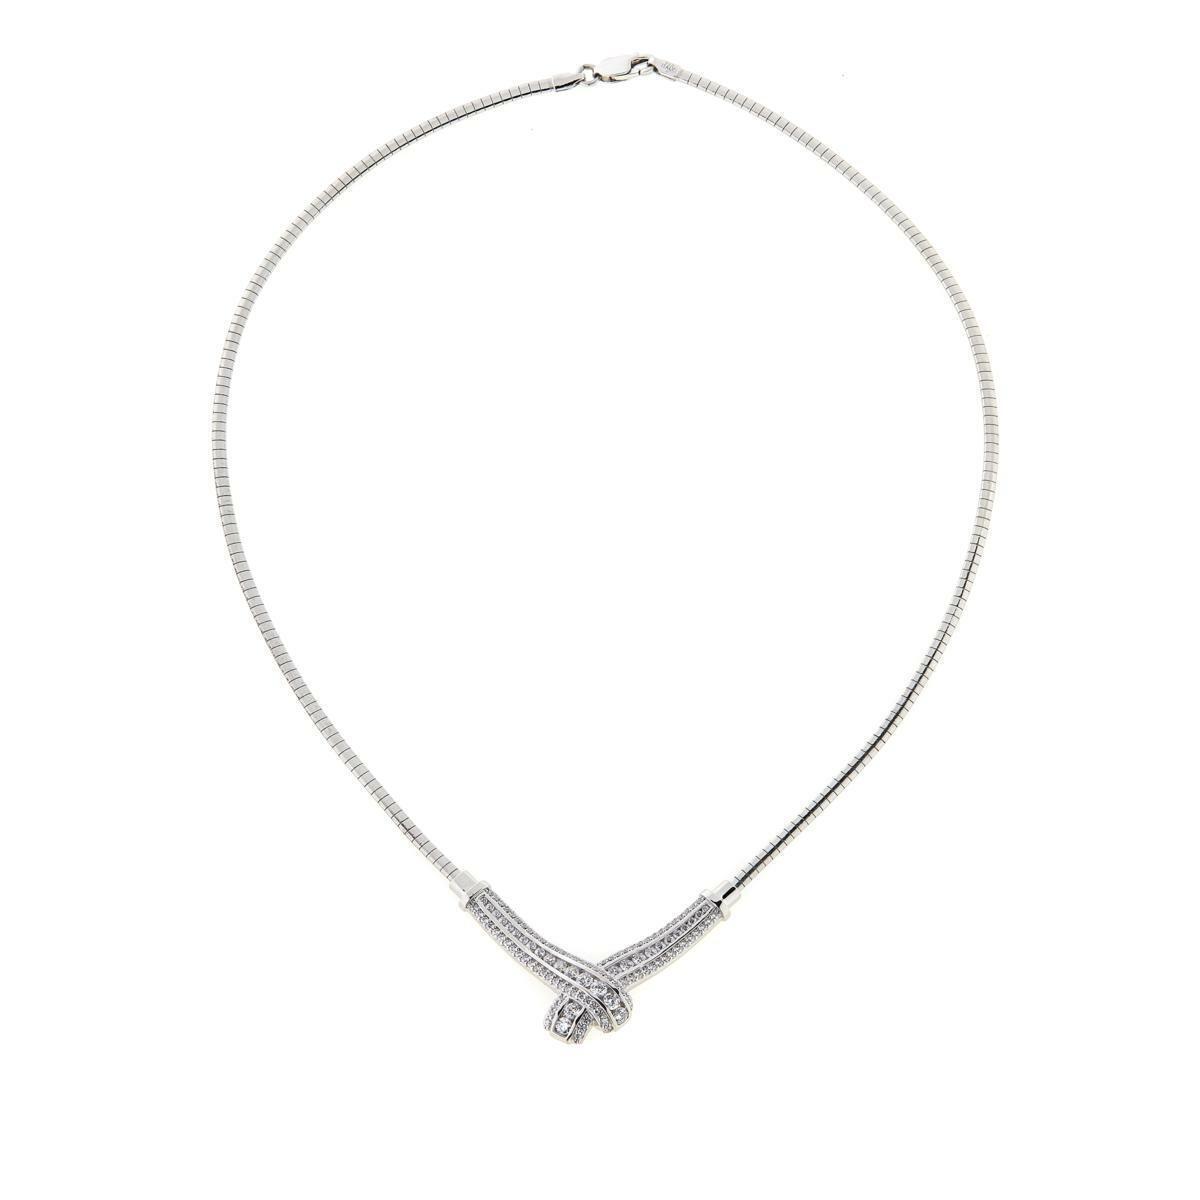 Absolute 1.80Ctw Cz Sterling Silver Bypass 17" Omega Necklace Hsn $130